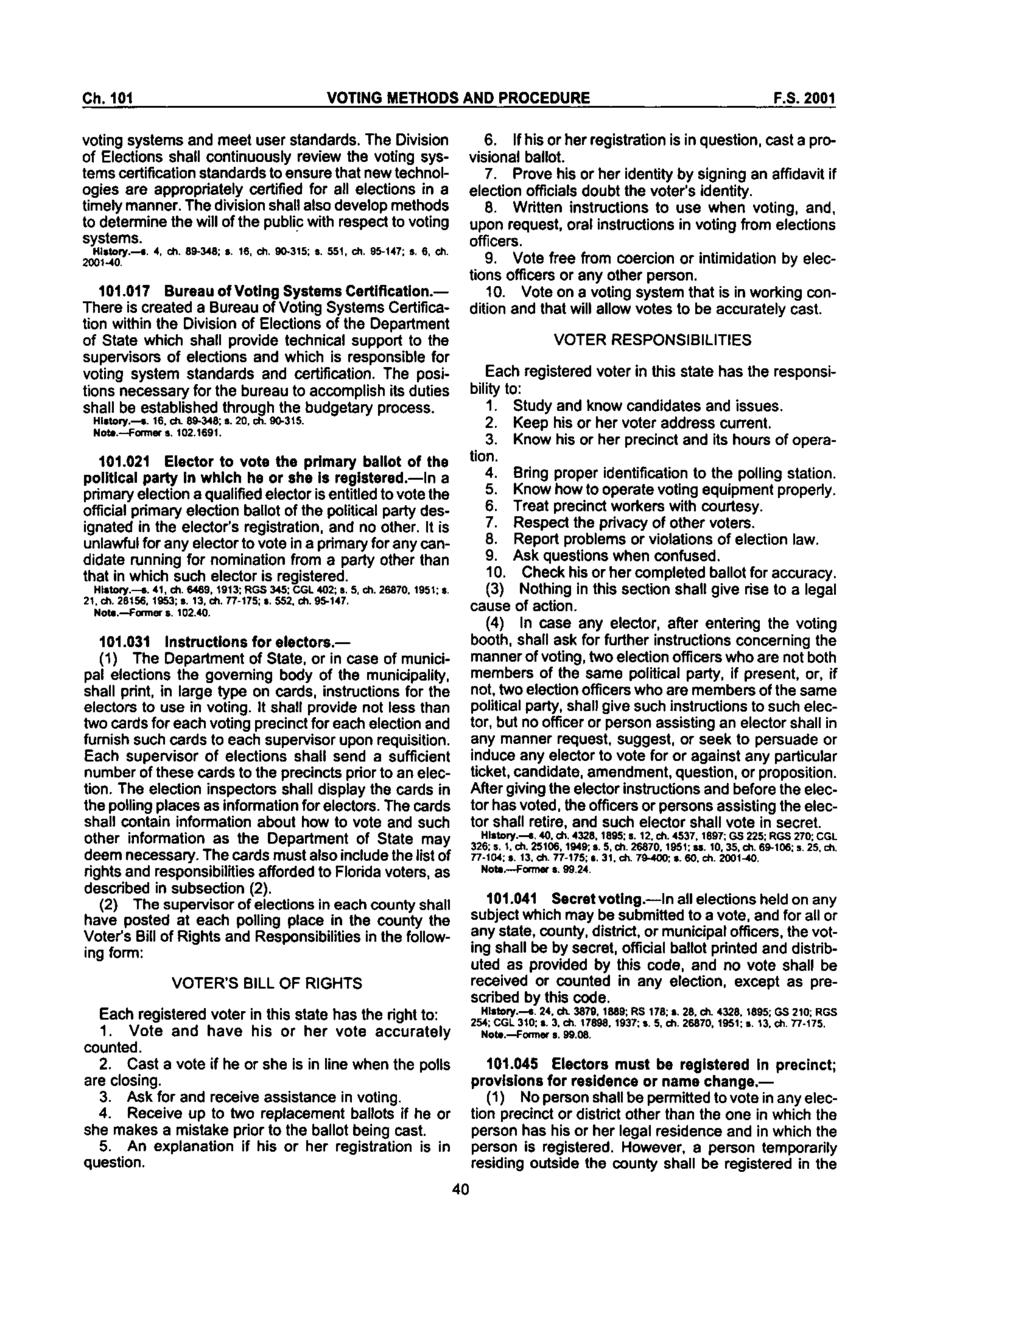 Ch.101 VOTING METHODS AND PROCEDURE F.S.2001 voting systems and meet user standards.